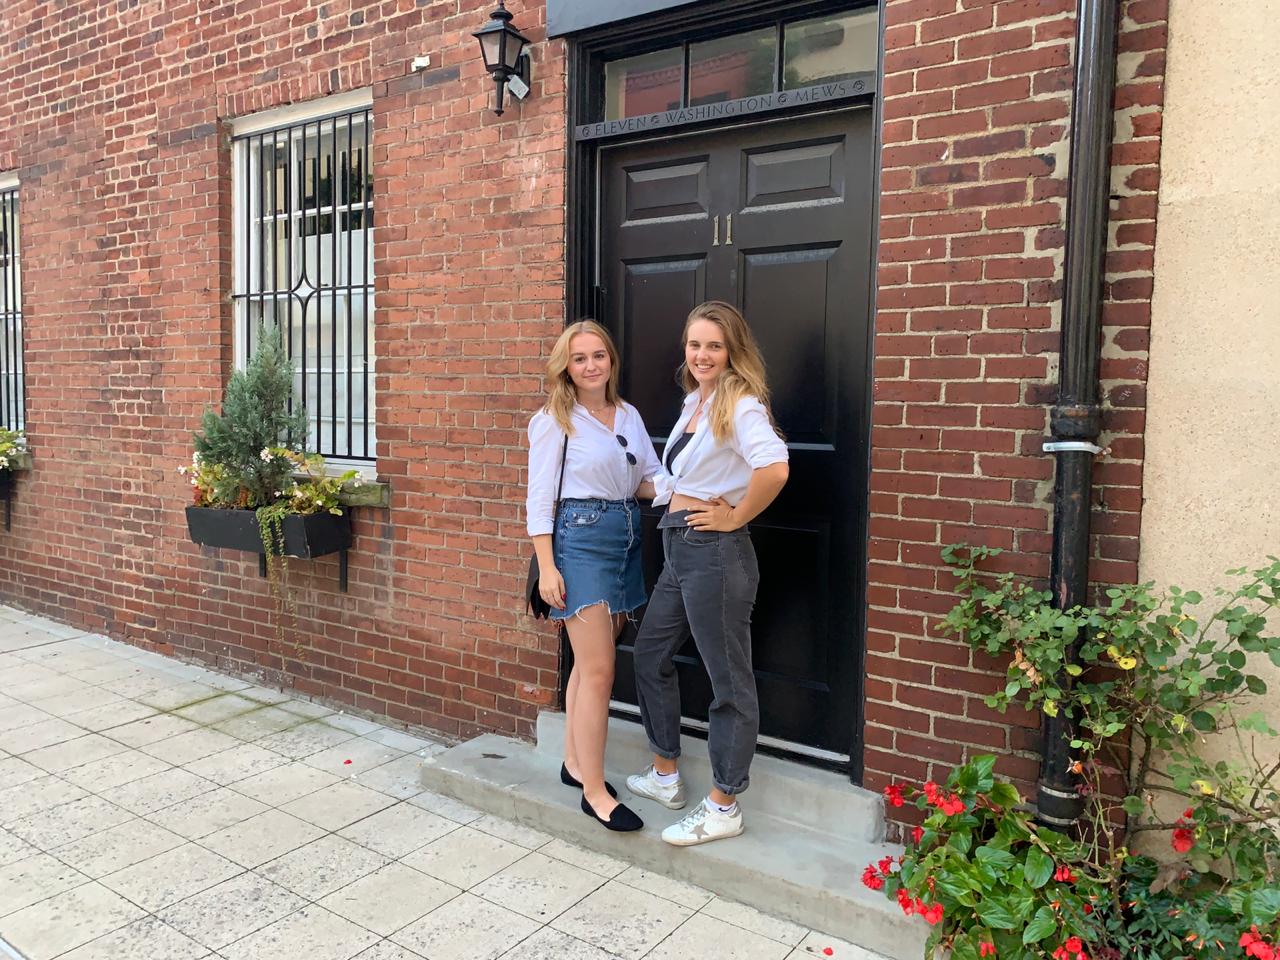 Two European Society students standing outside the door of a brick building.